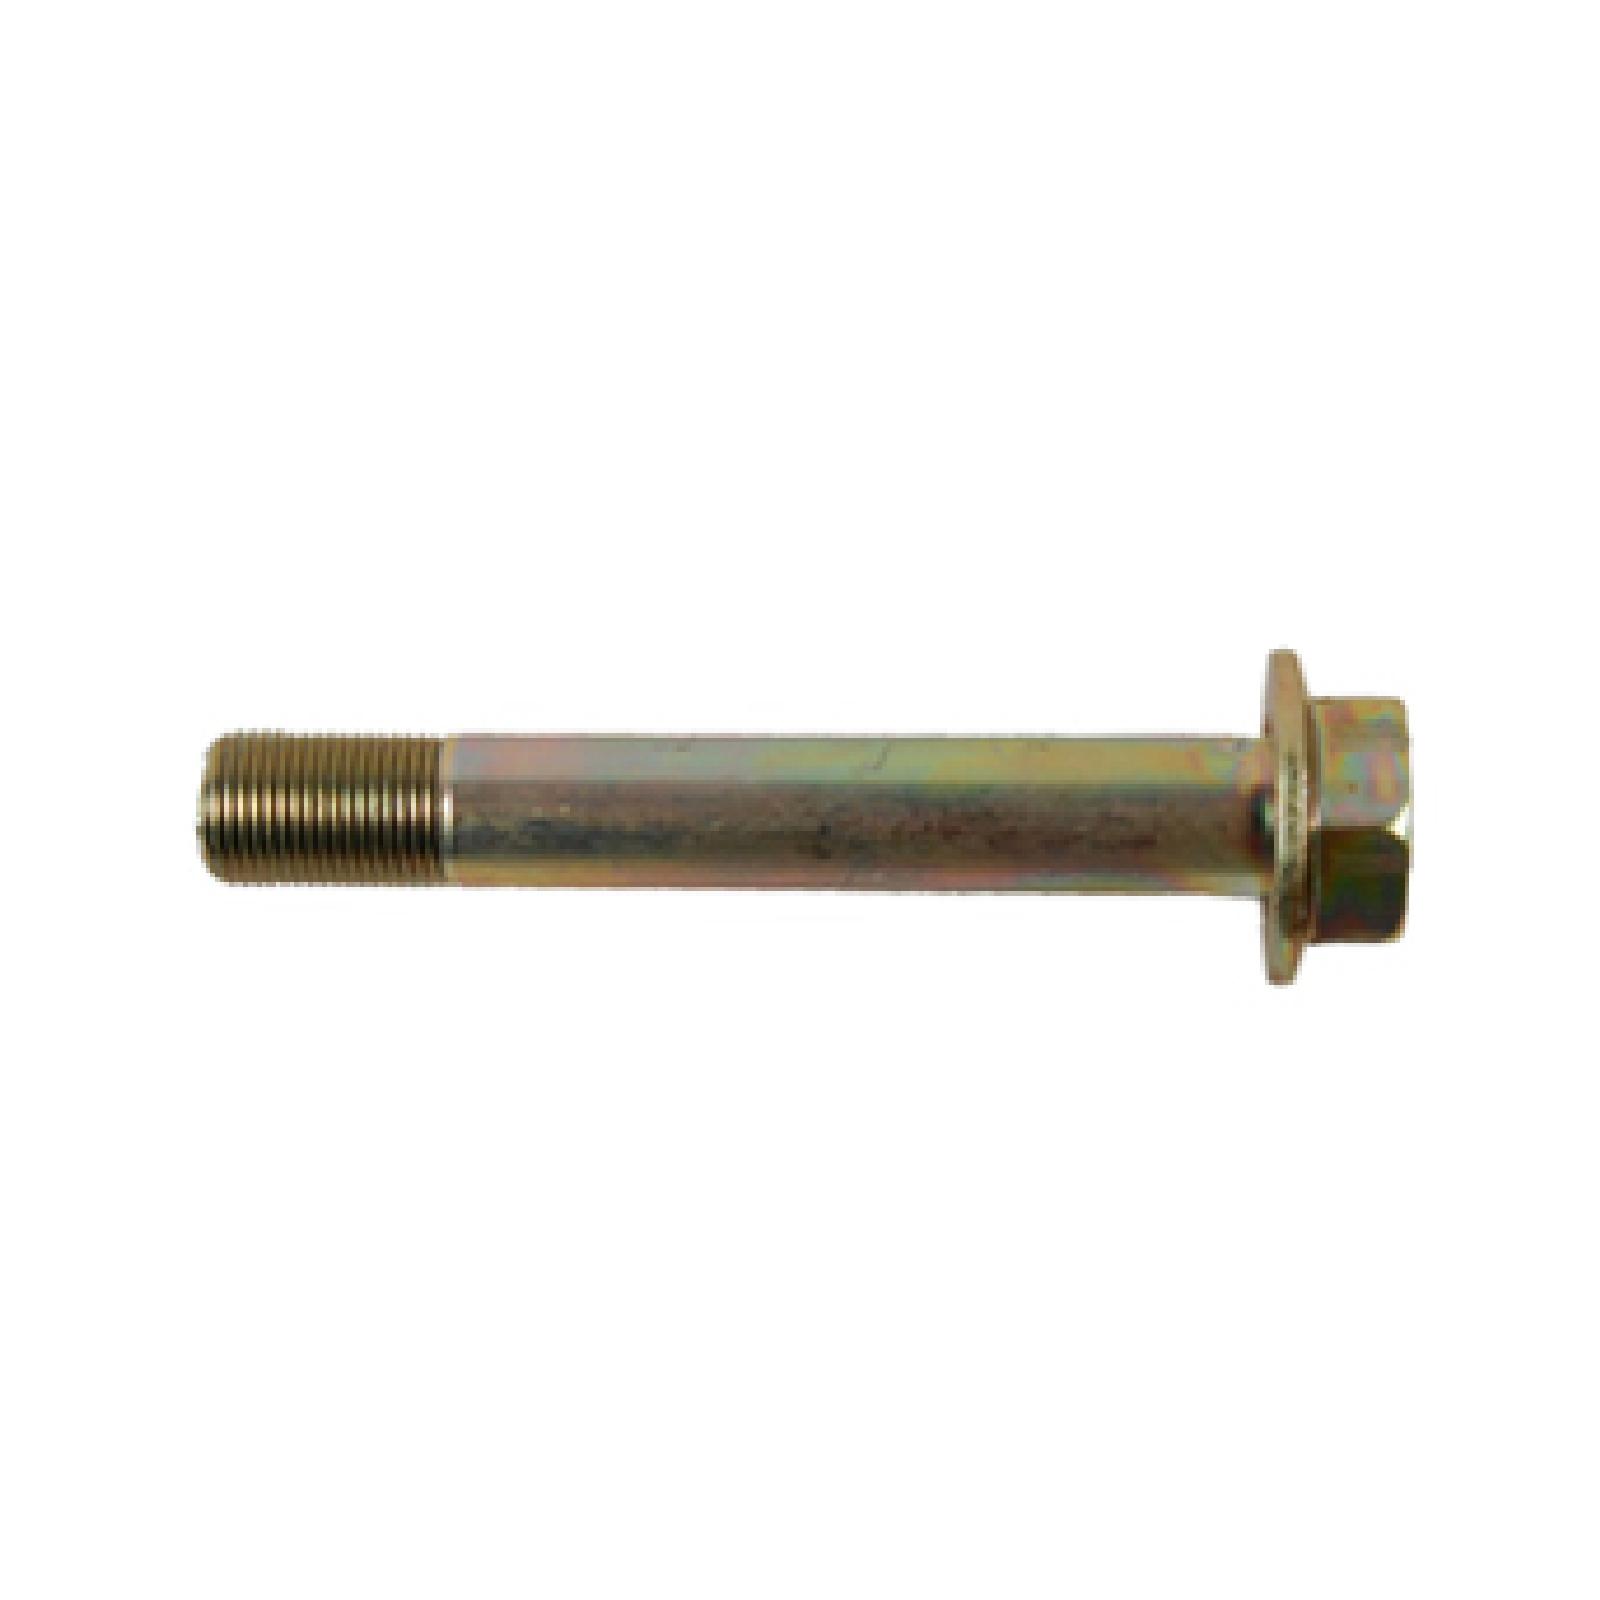 BOLT BLADE 3/4 X 5 part# 710-1693 by MTD - Click Image to Close